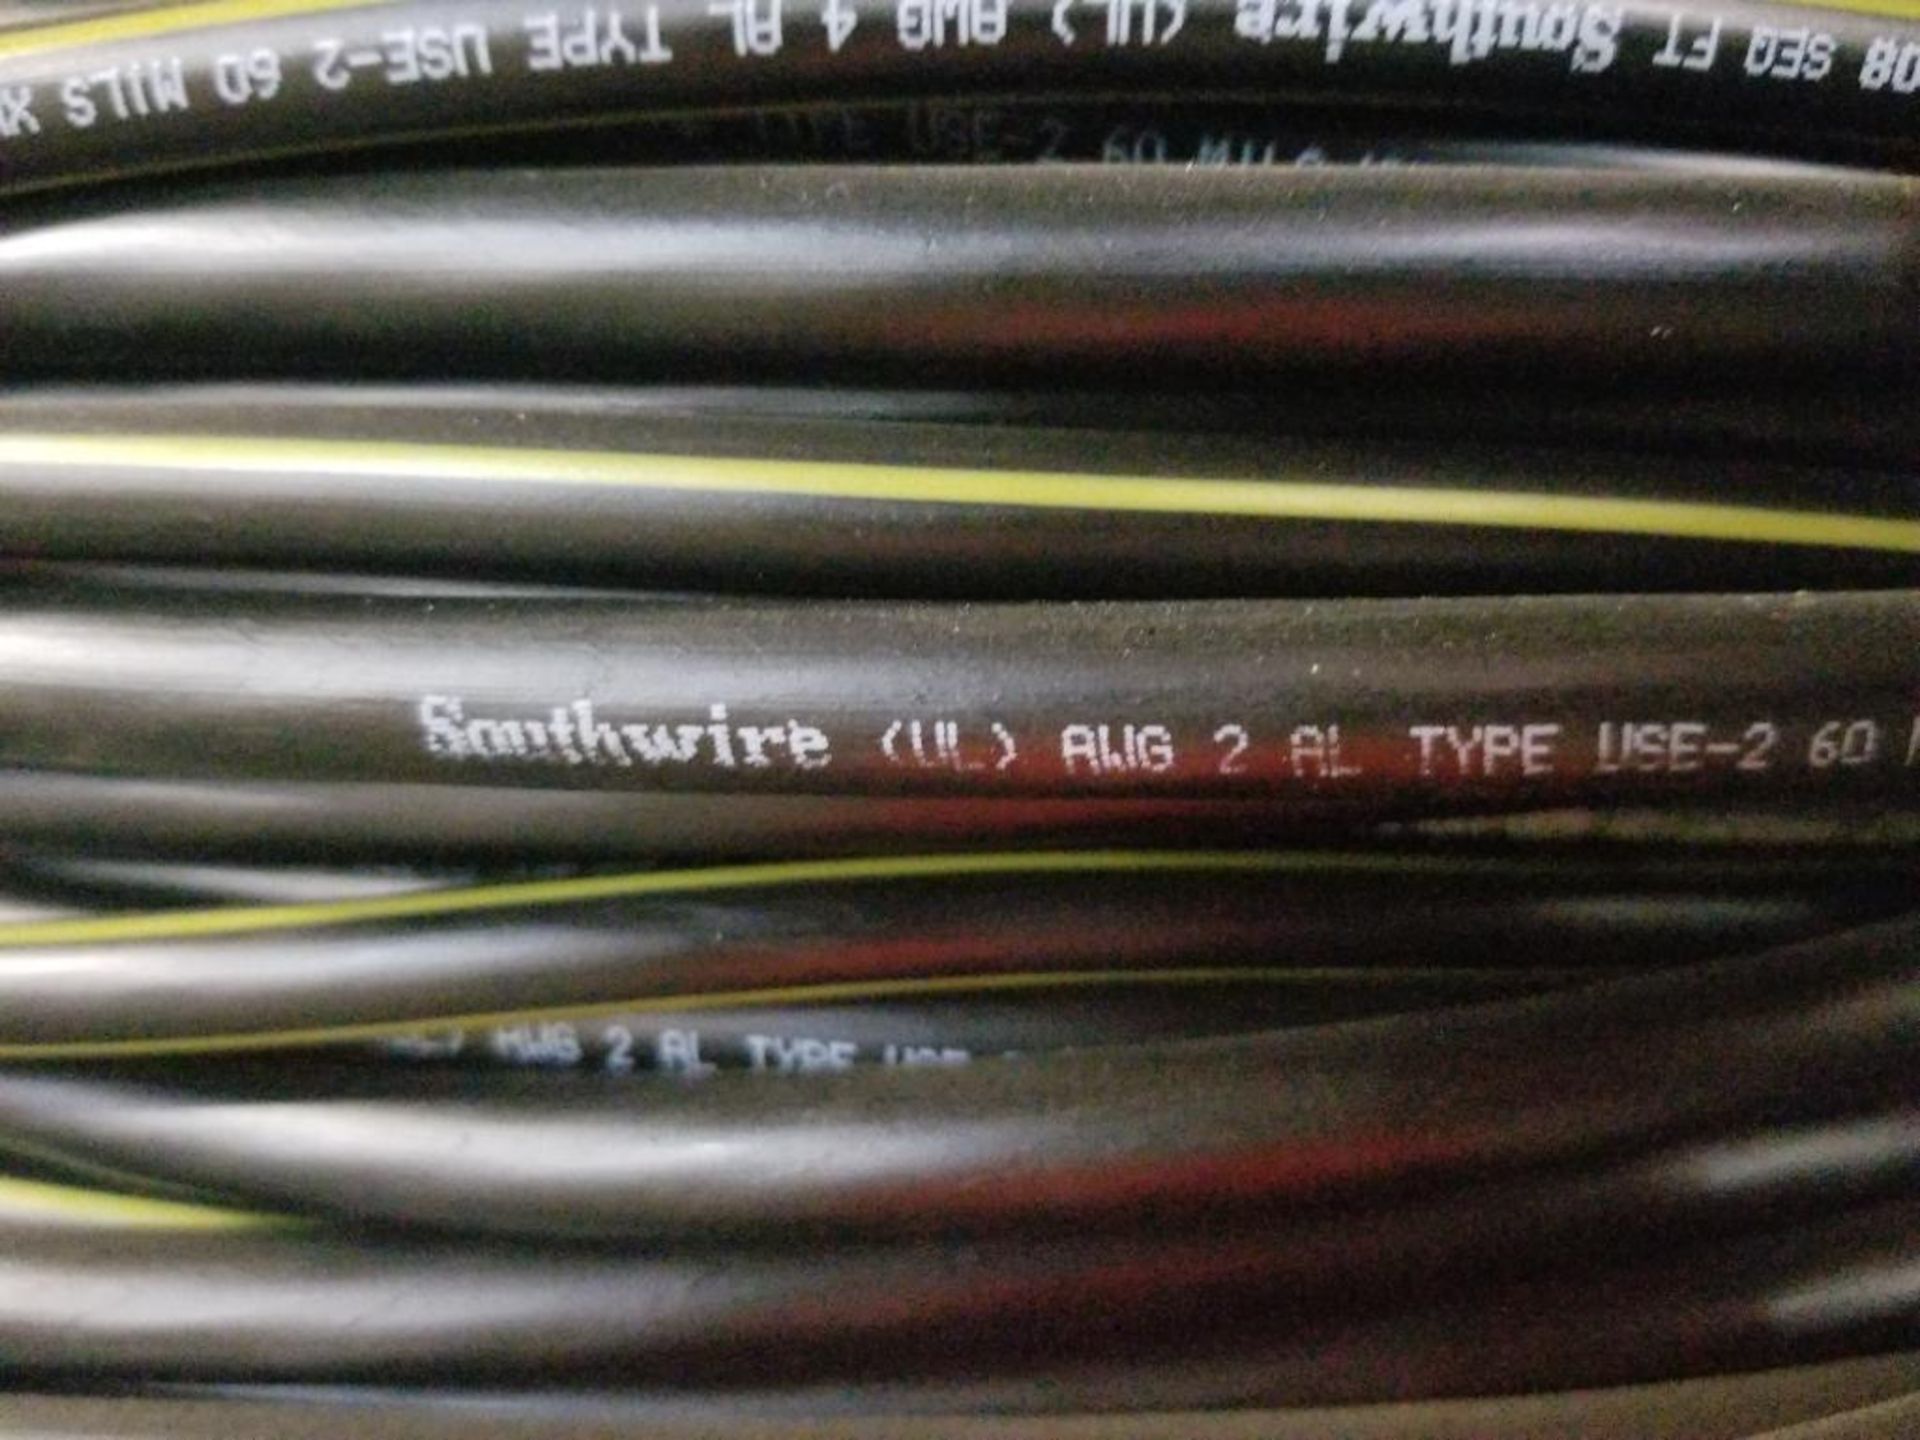 Spool of Southwire. Awg 2 AL, type use-2 60 MILS. 600v. - Image 6 of 8